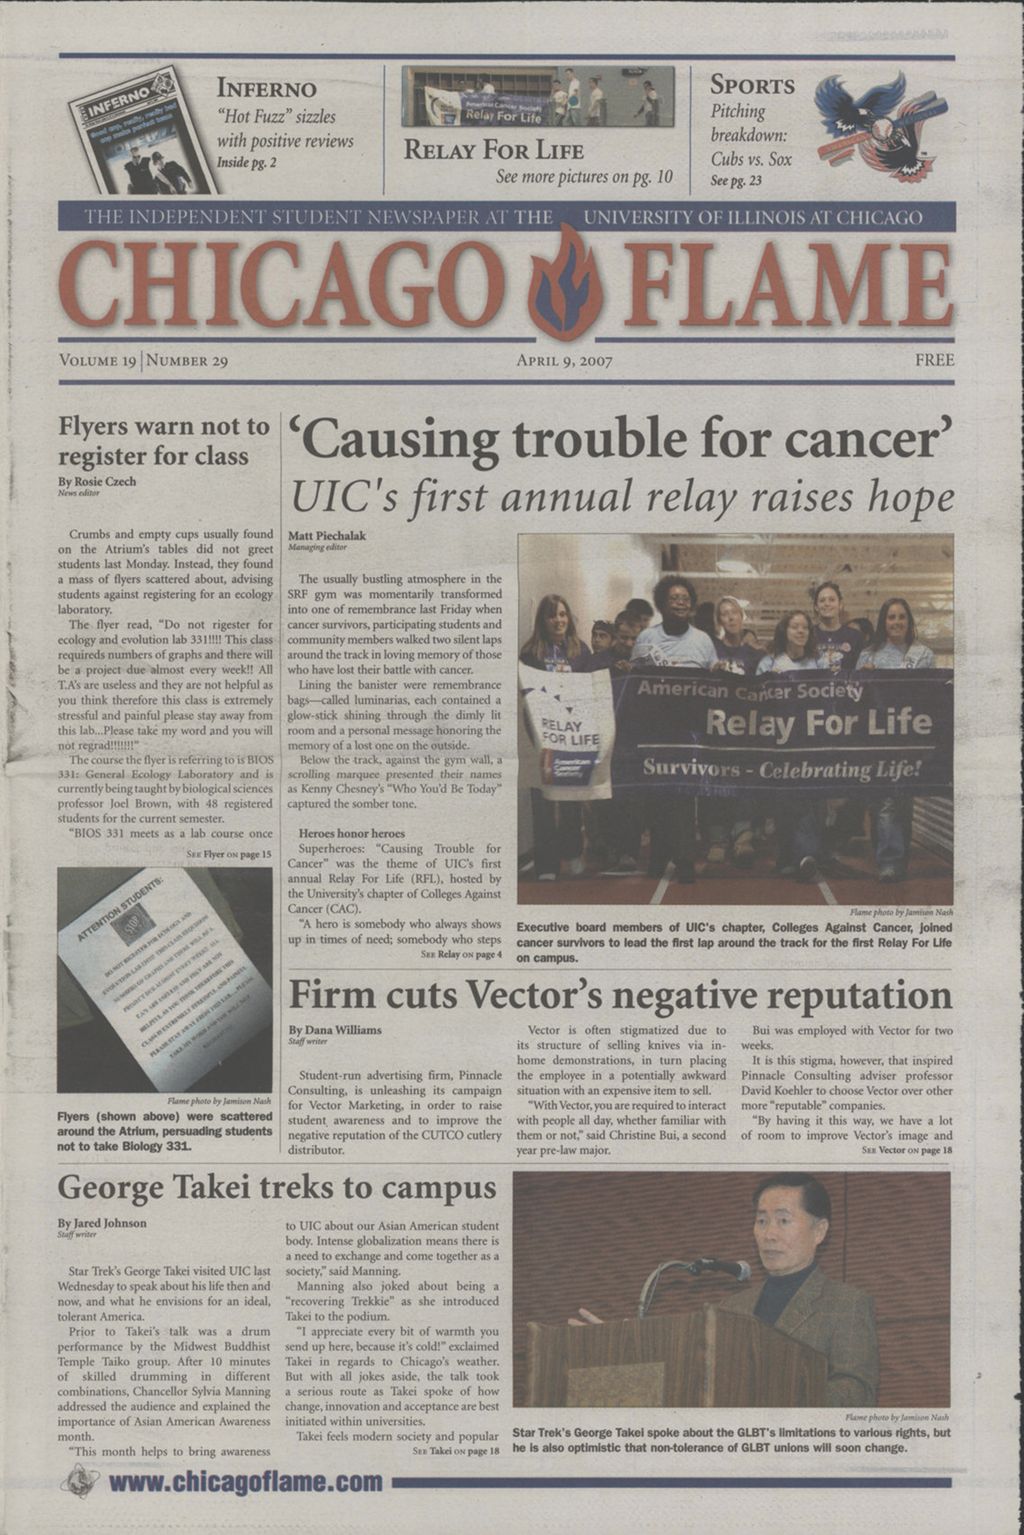 Chicago Flame (April 9, 2007)